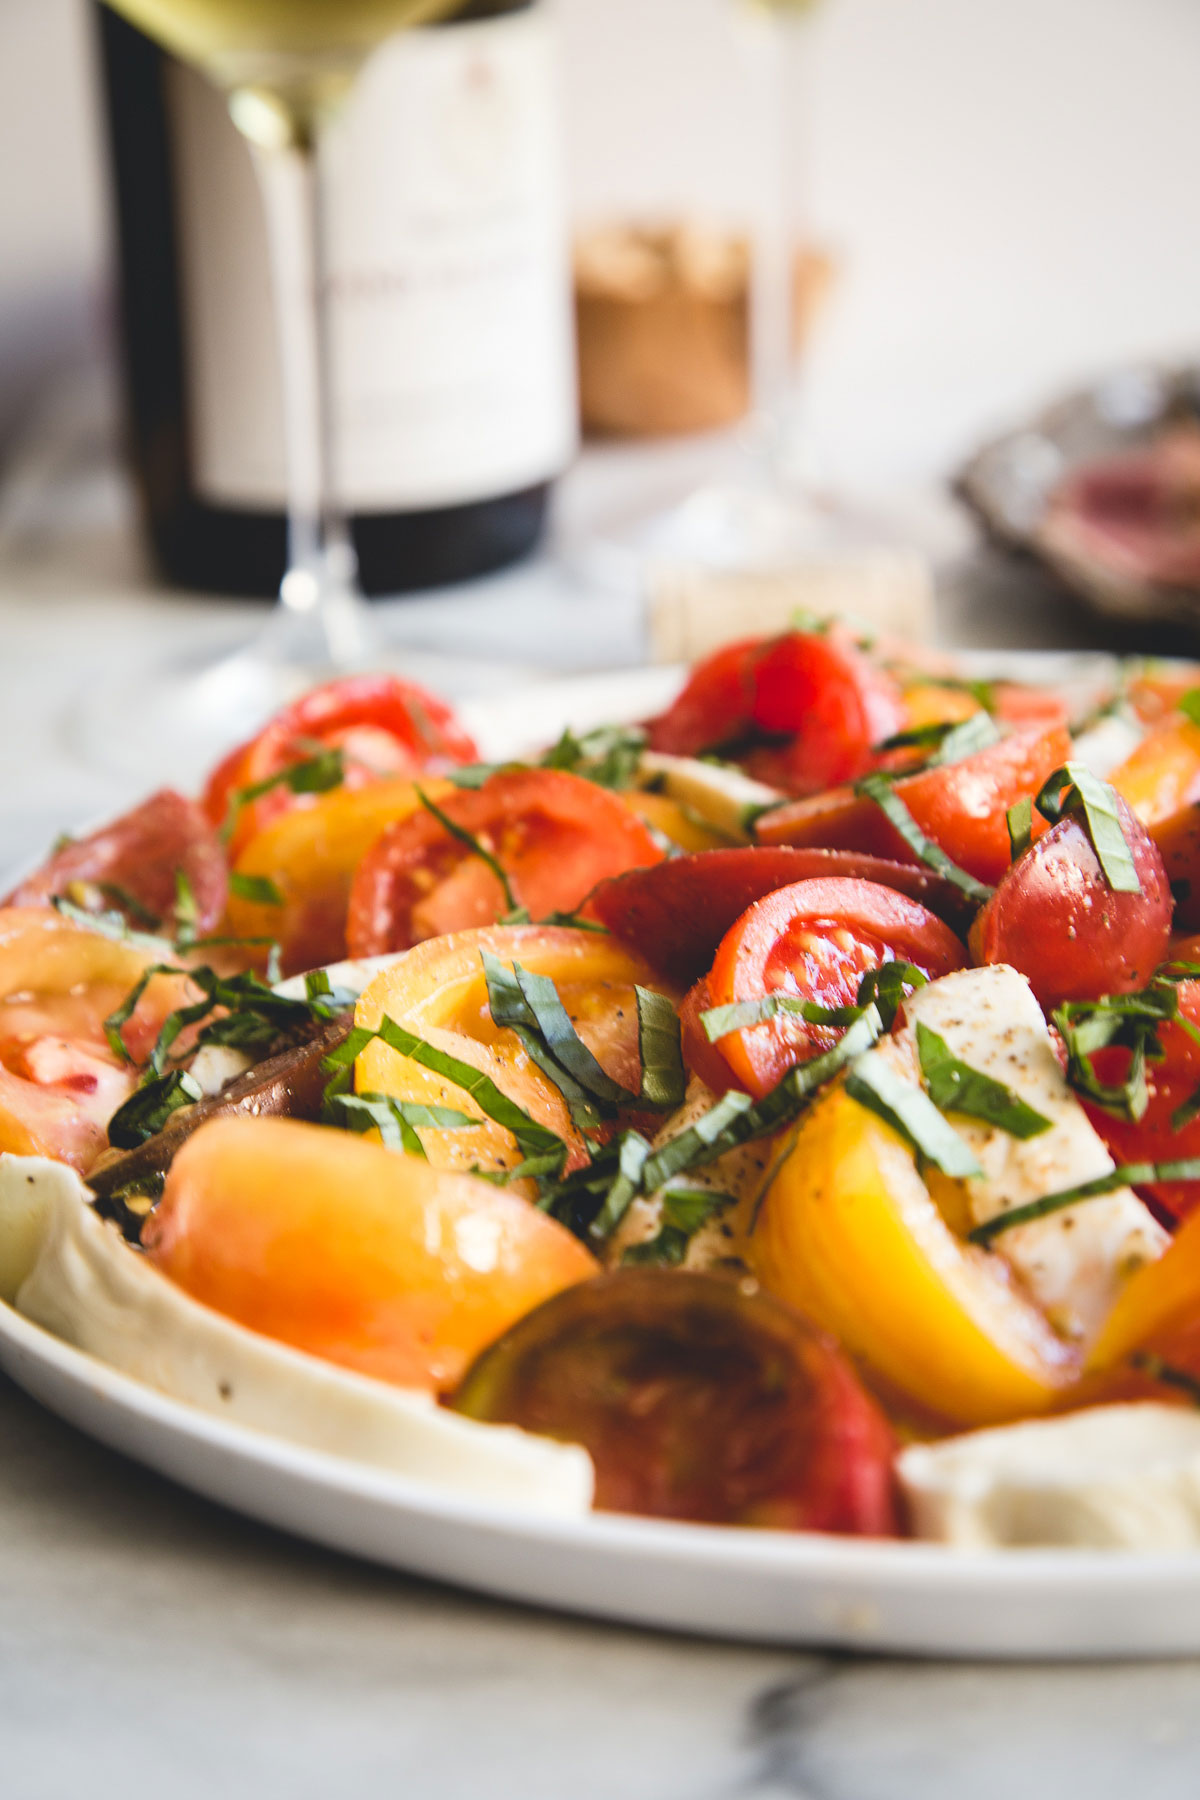 To highlight the heirloom tomato and let it speak for itself, we want to share this stunning heirloom tomato & mozzarella salad recipe with you! This bright summer salad is perfect for outdoor barbecues, a date night in or with a nice side of grilled beef.